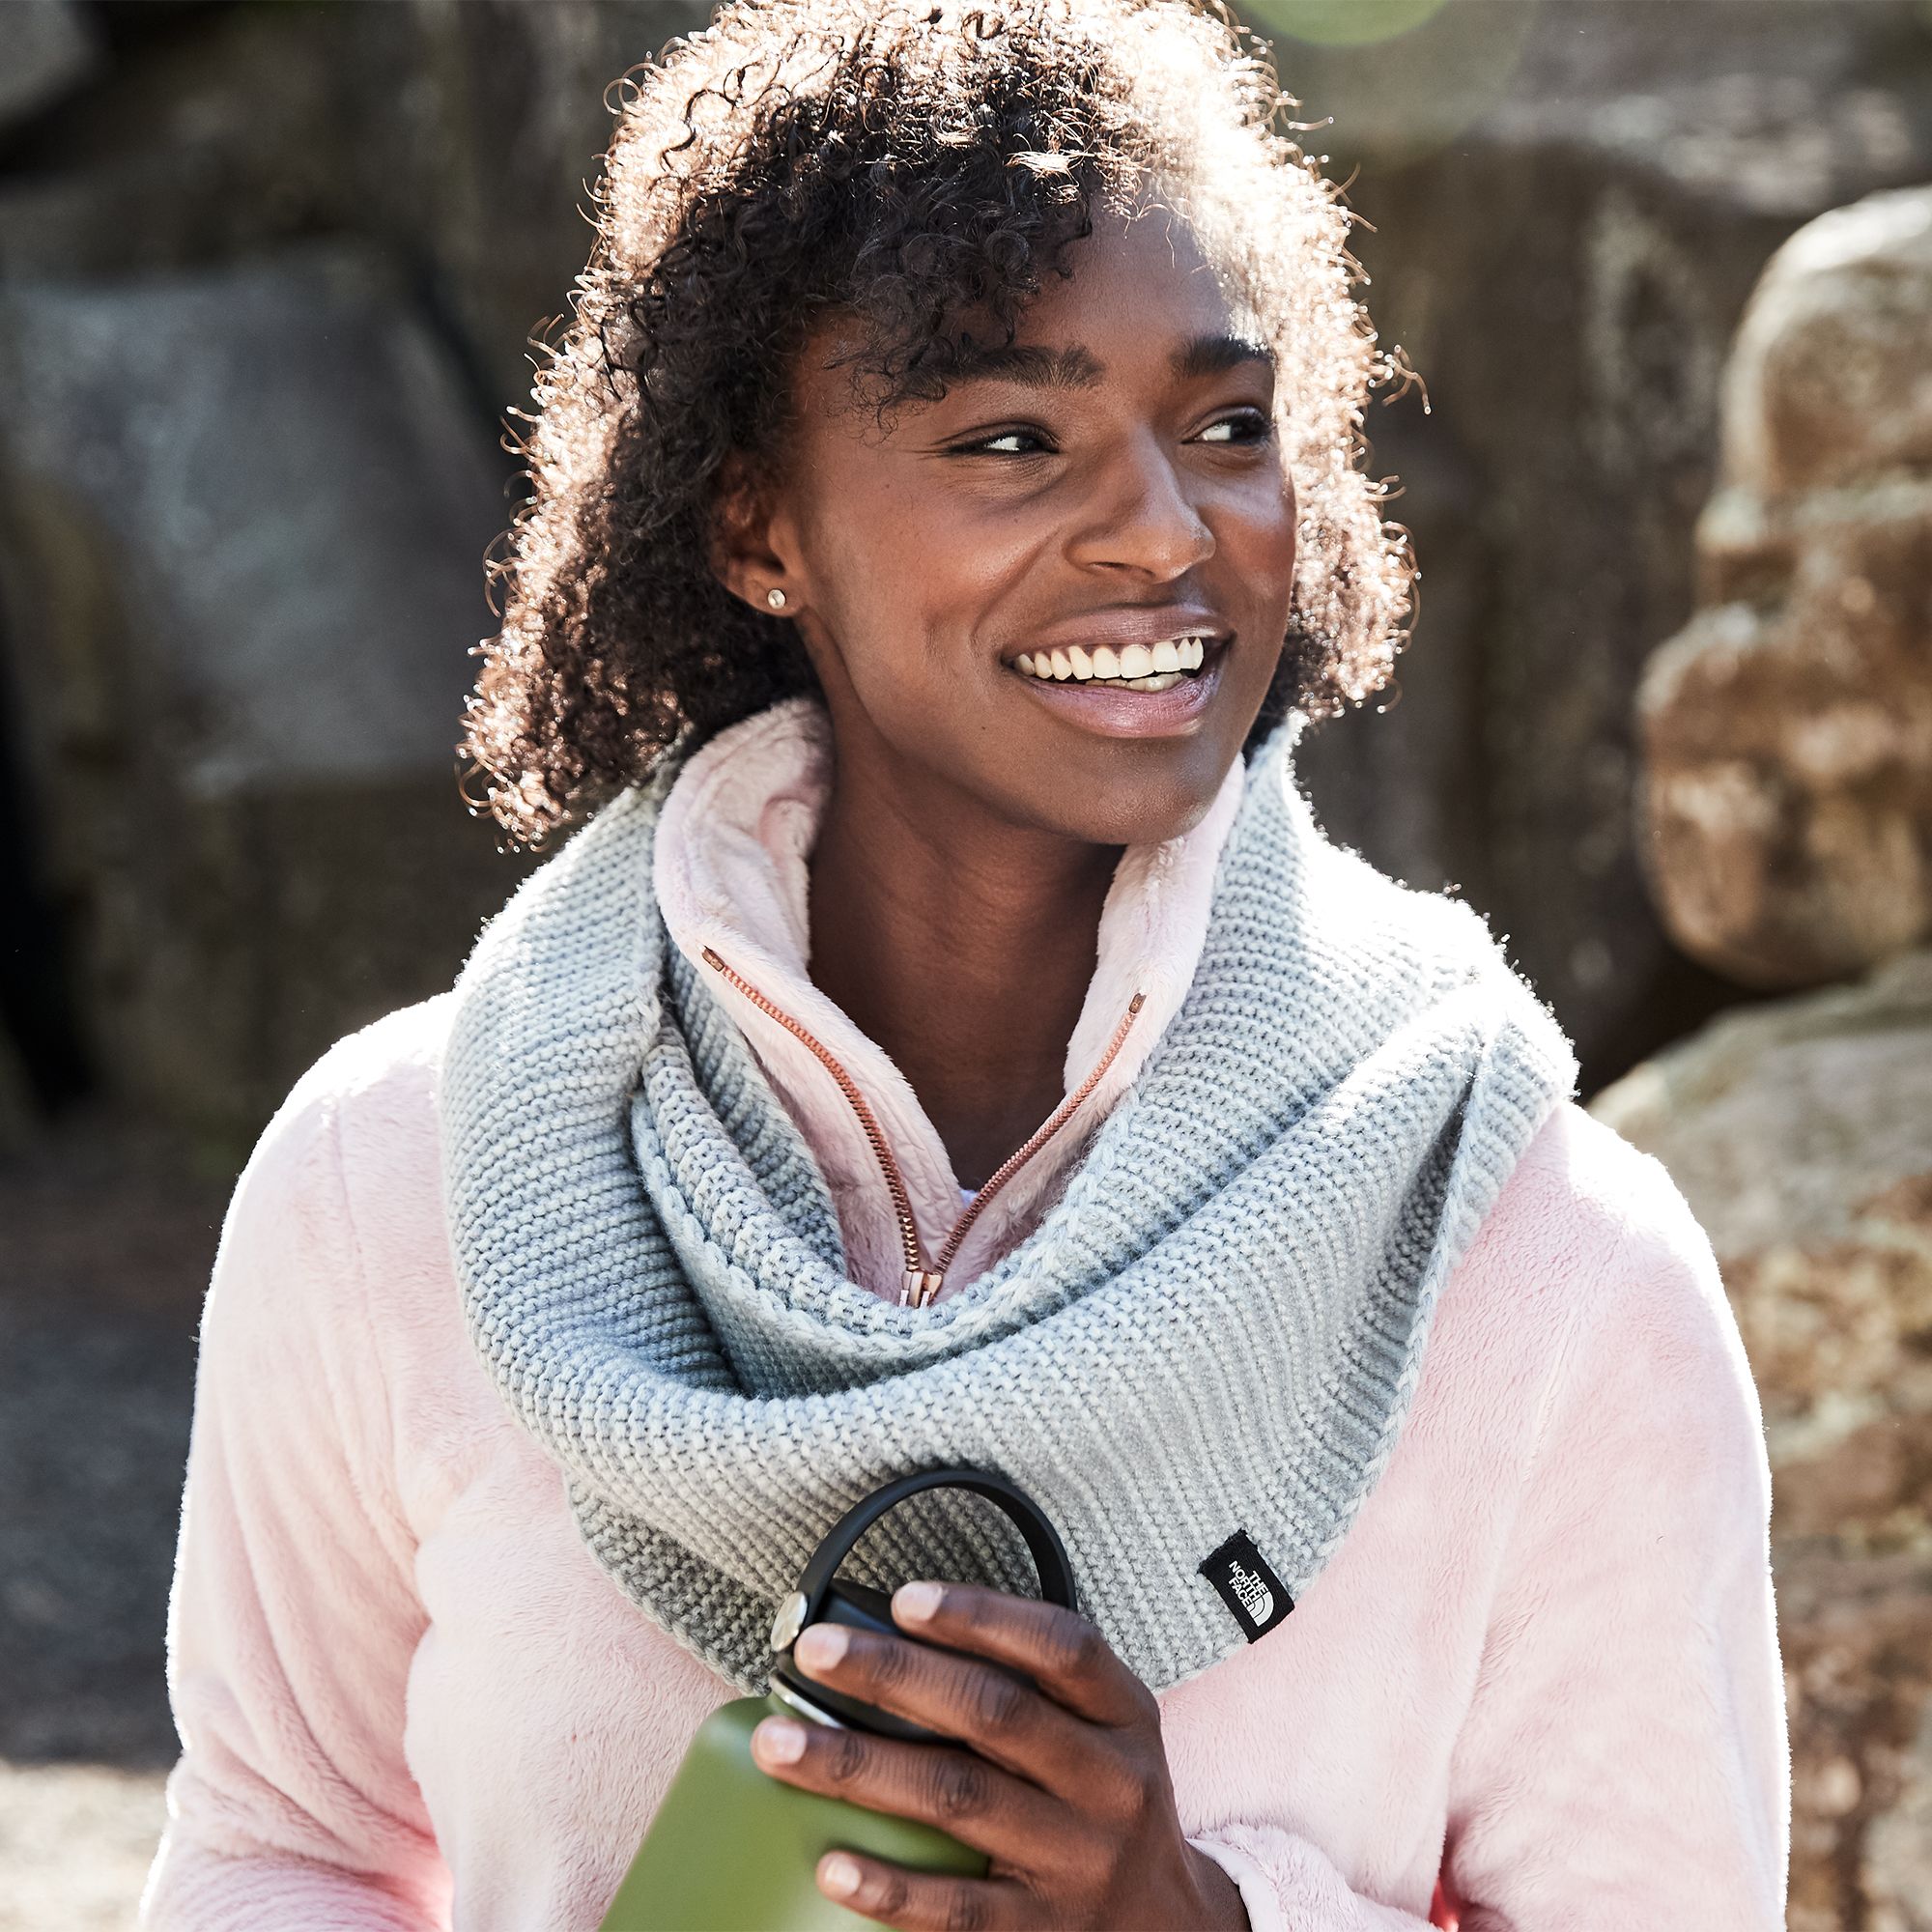 the north face women's purrl stitch infinity scarf